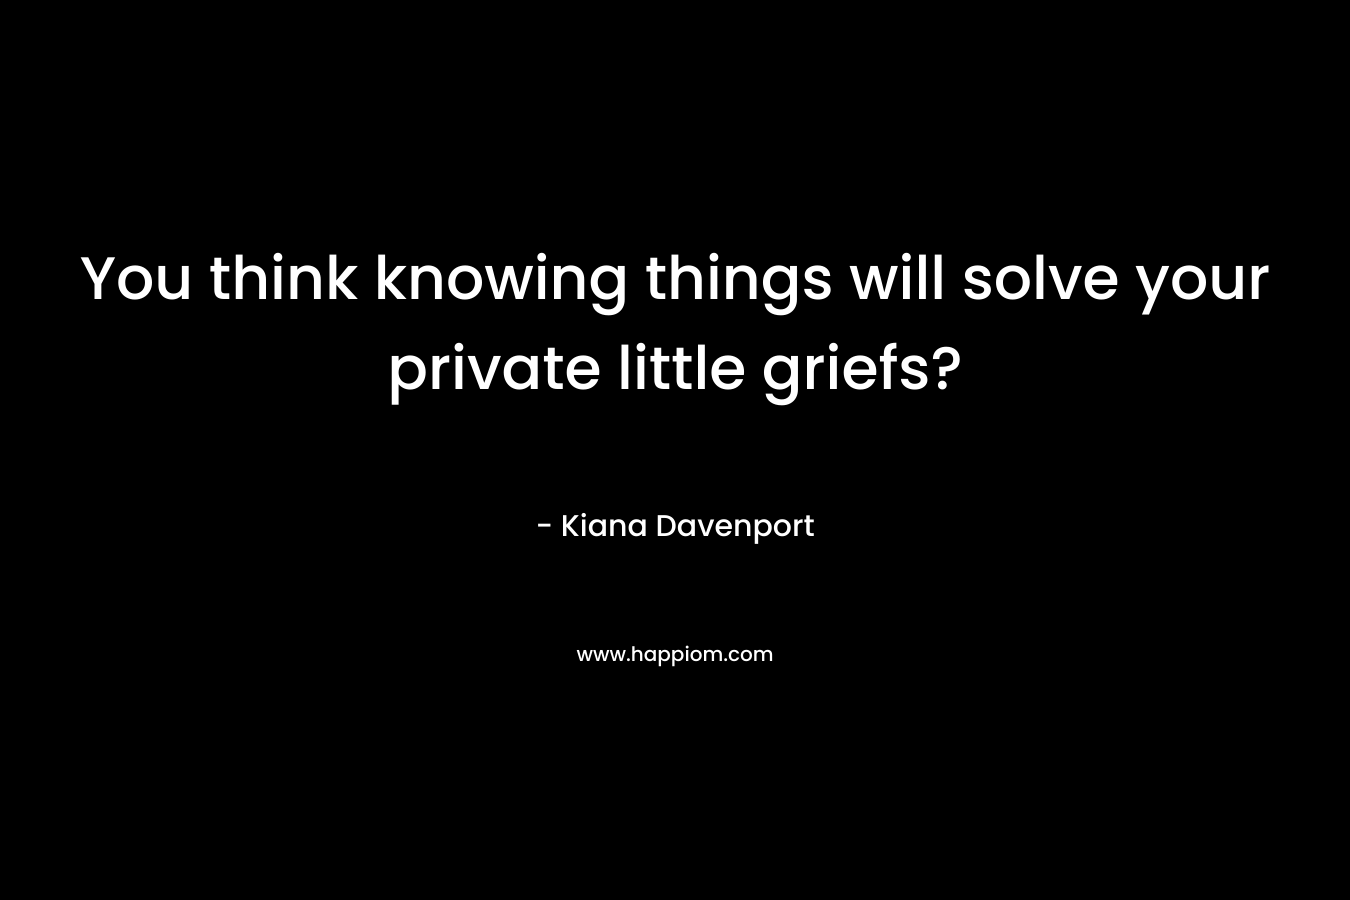 You think knowing things will solve your private little griefs?